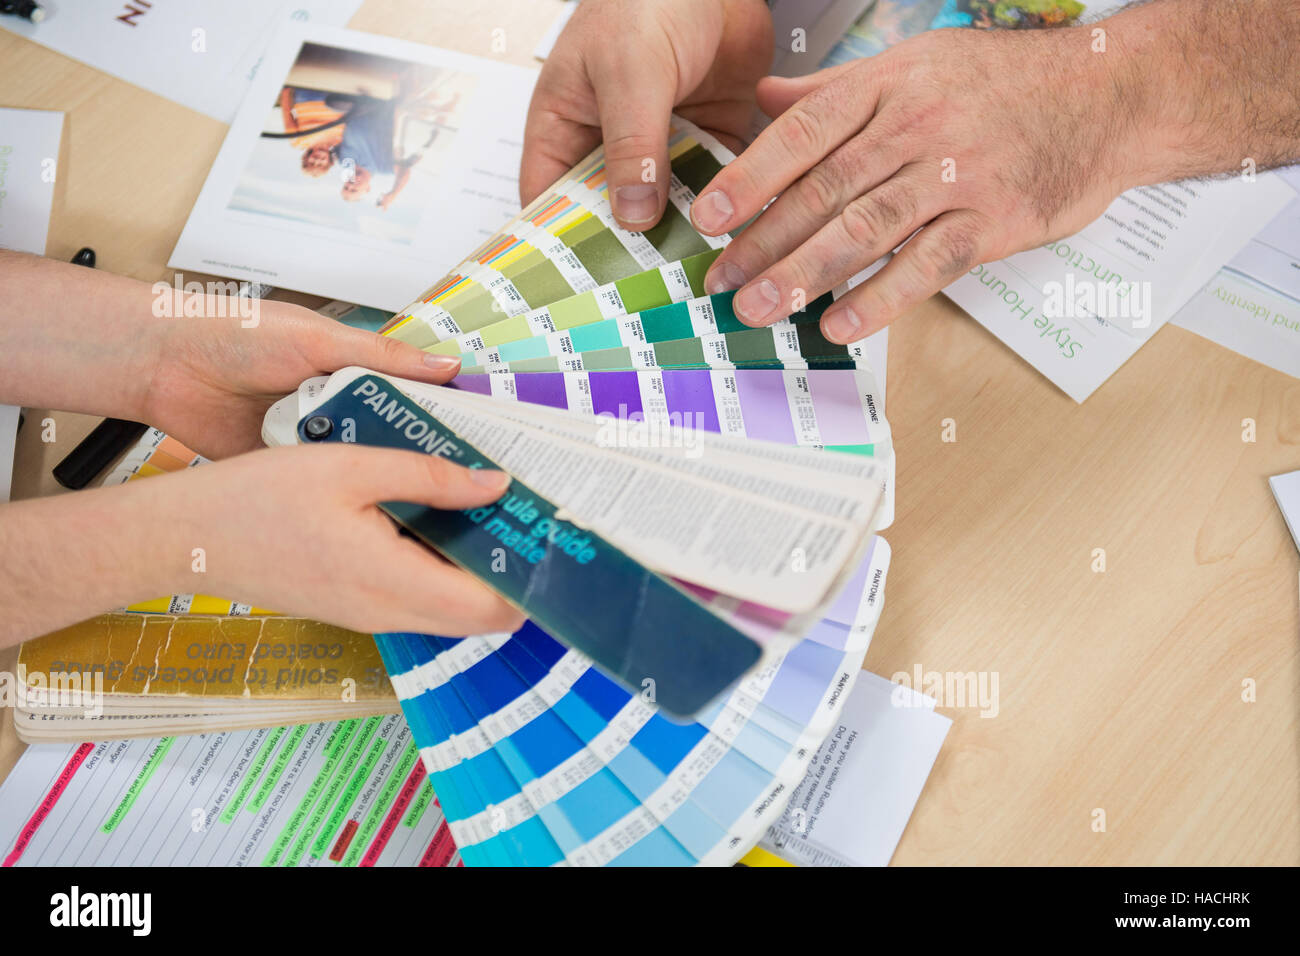 Graphic designers choosing from a Pantone colour fan deck Stock Photo -  Alamy